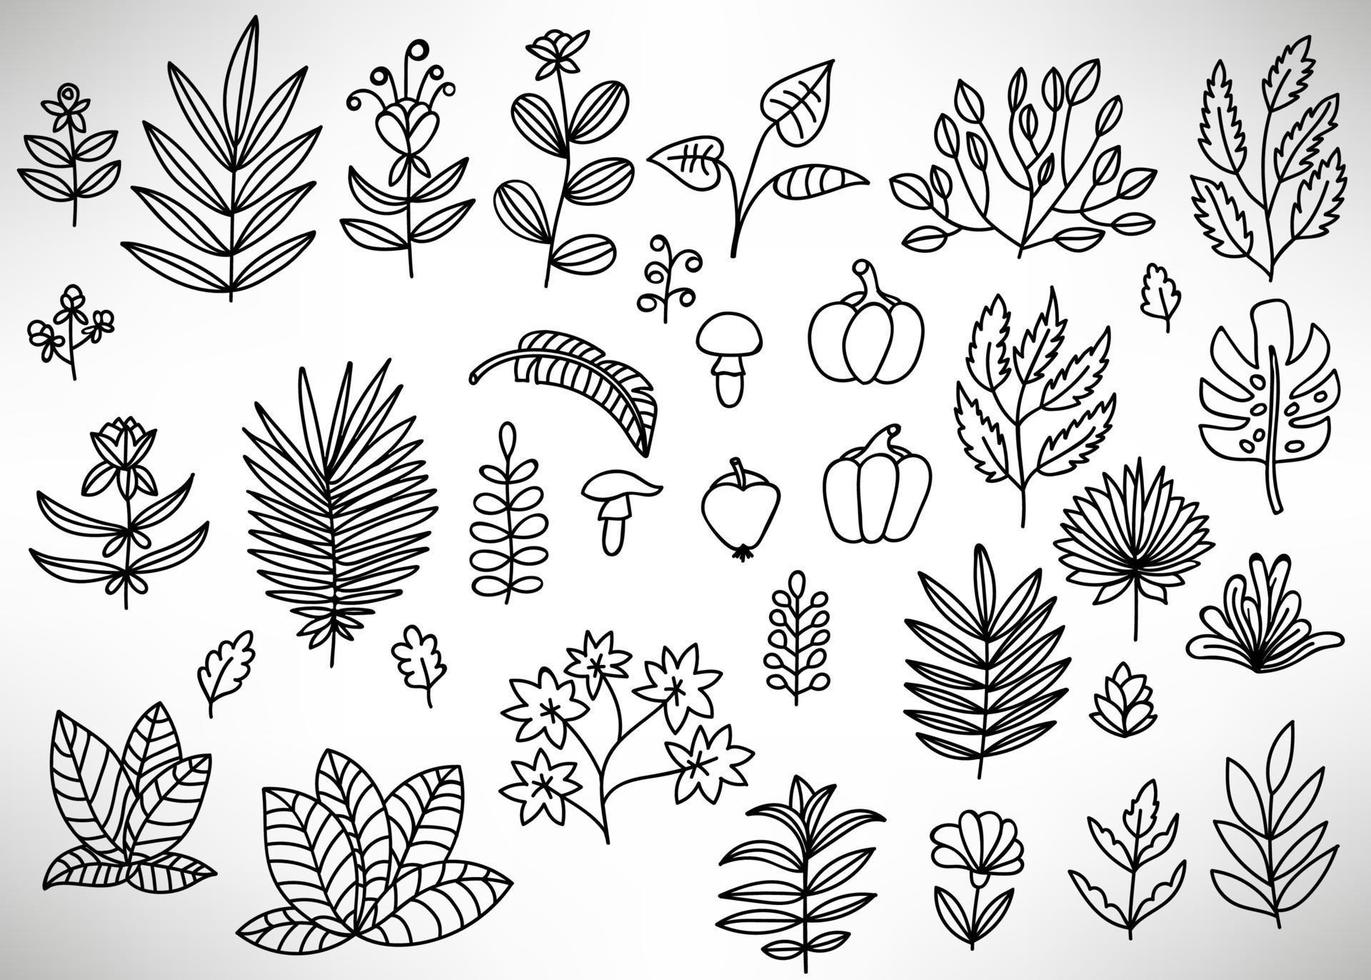 Big Floral Set of black hand drawn flowers, bushes, leaves, branches isolated on white. Collection of flourish elements for design. vector